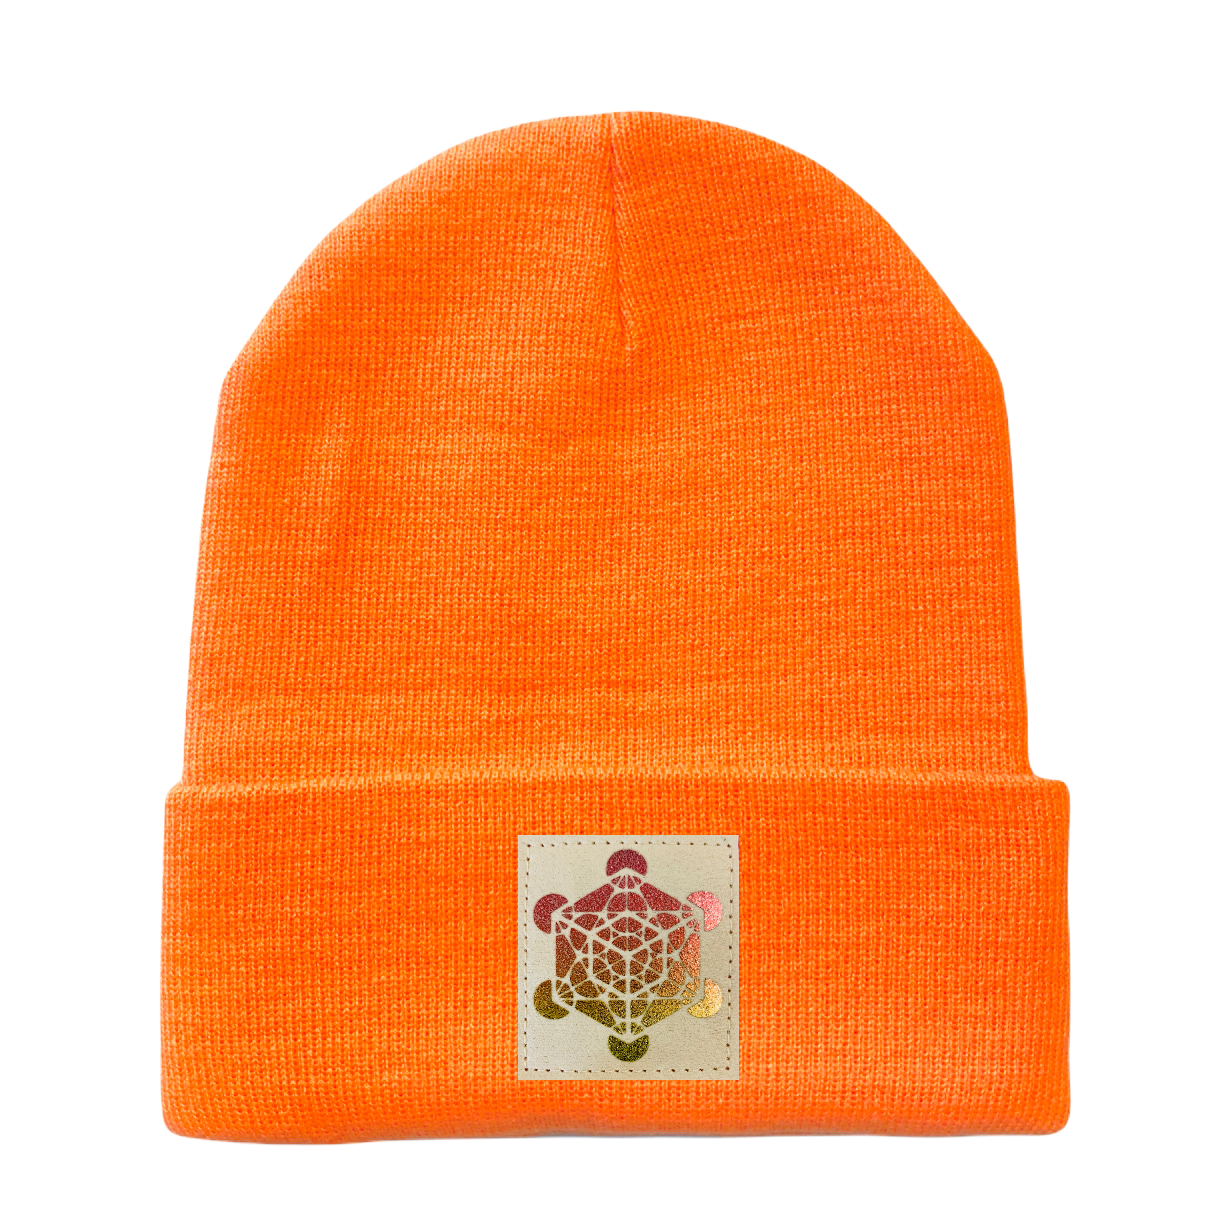 Neon Safety Orange Cuffed Beanie with Hand Made Vegan Leather Holographic Matatron's Cube Patch over your Third eye, sacred geometry hat by Buddha Gear